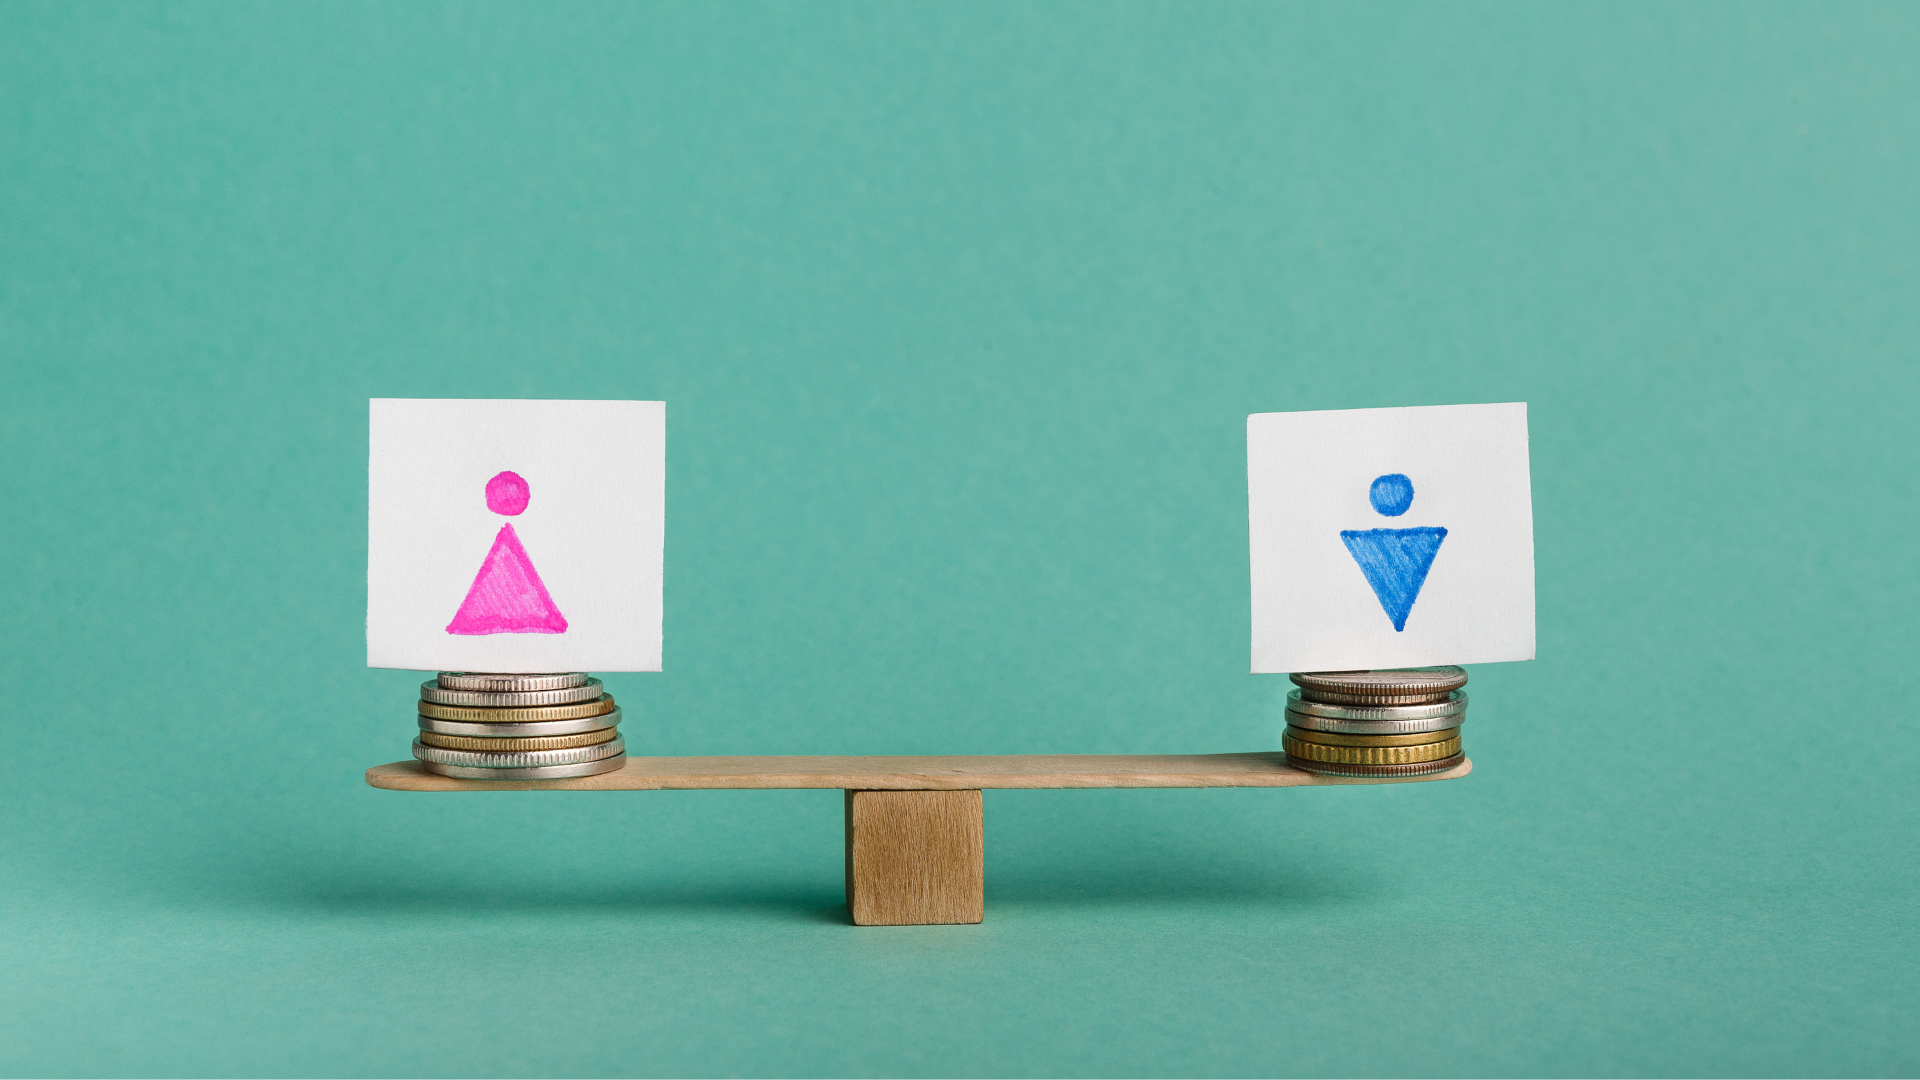 Equal Pay for man and woman, cards with gender figures and similar coin stacks on seesaw symbolizin...